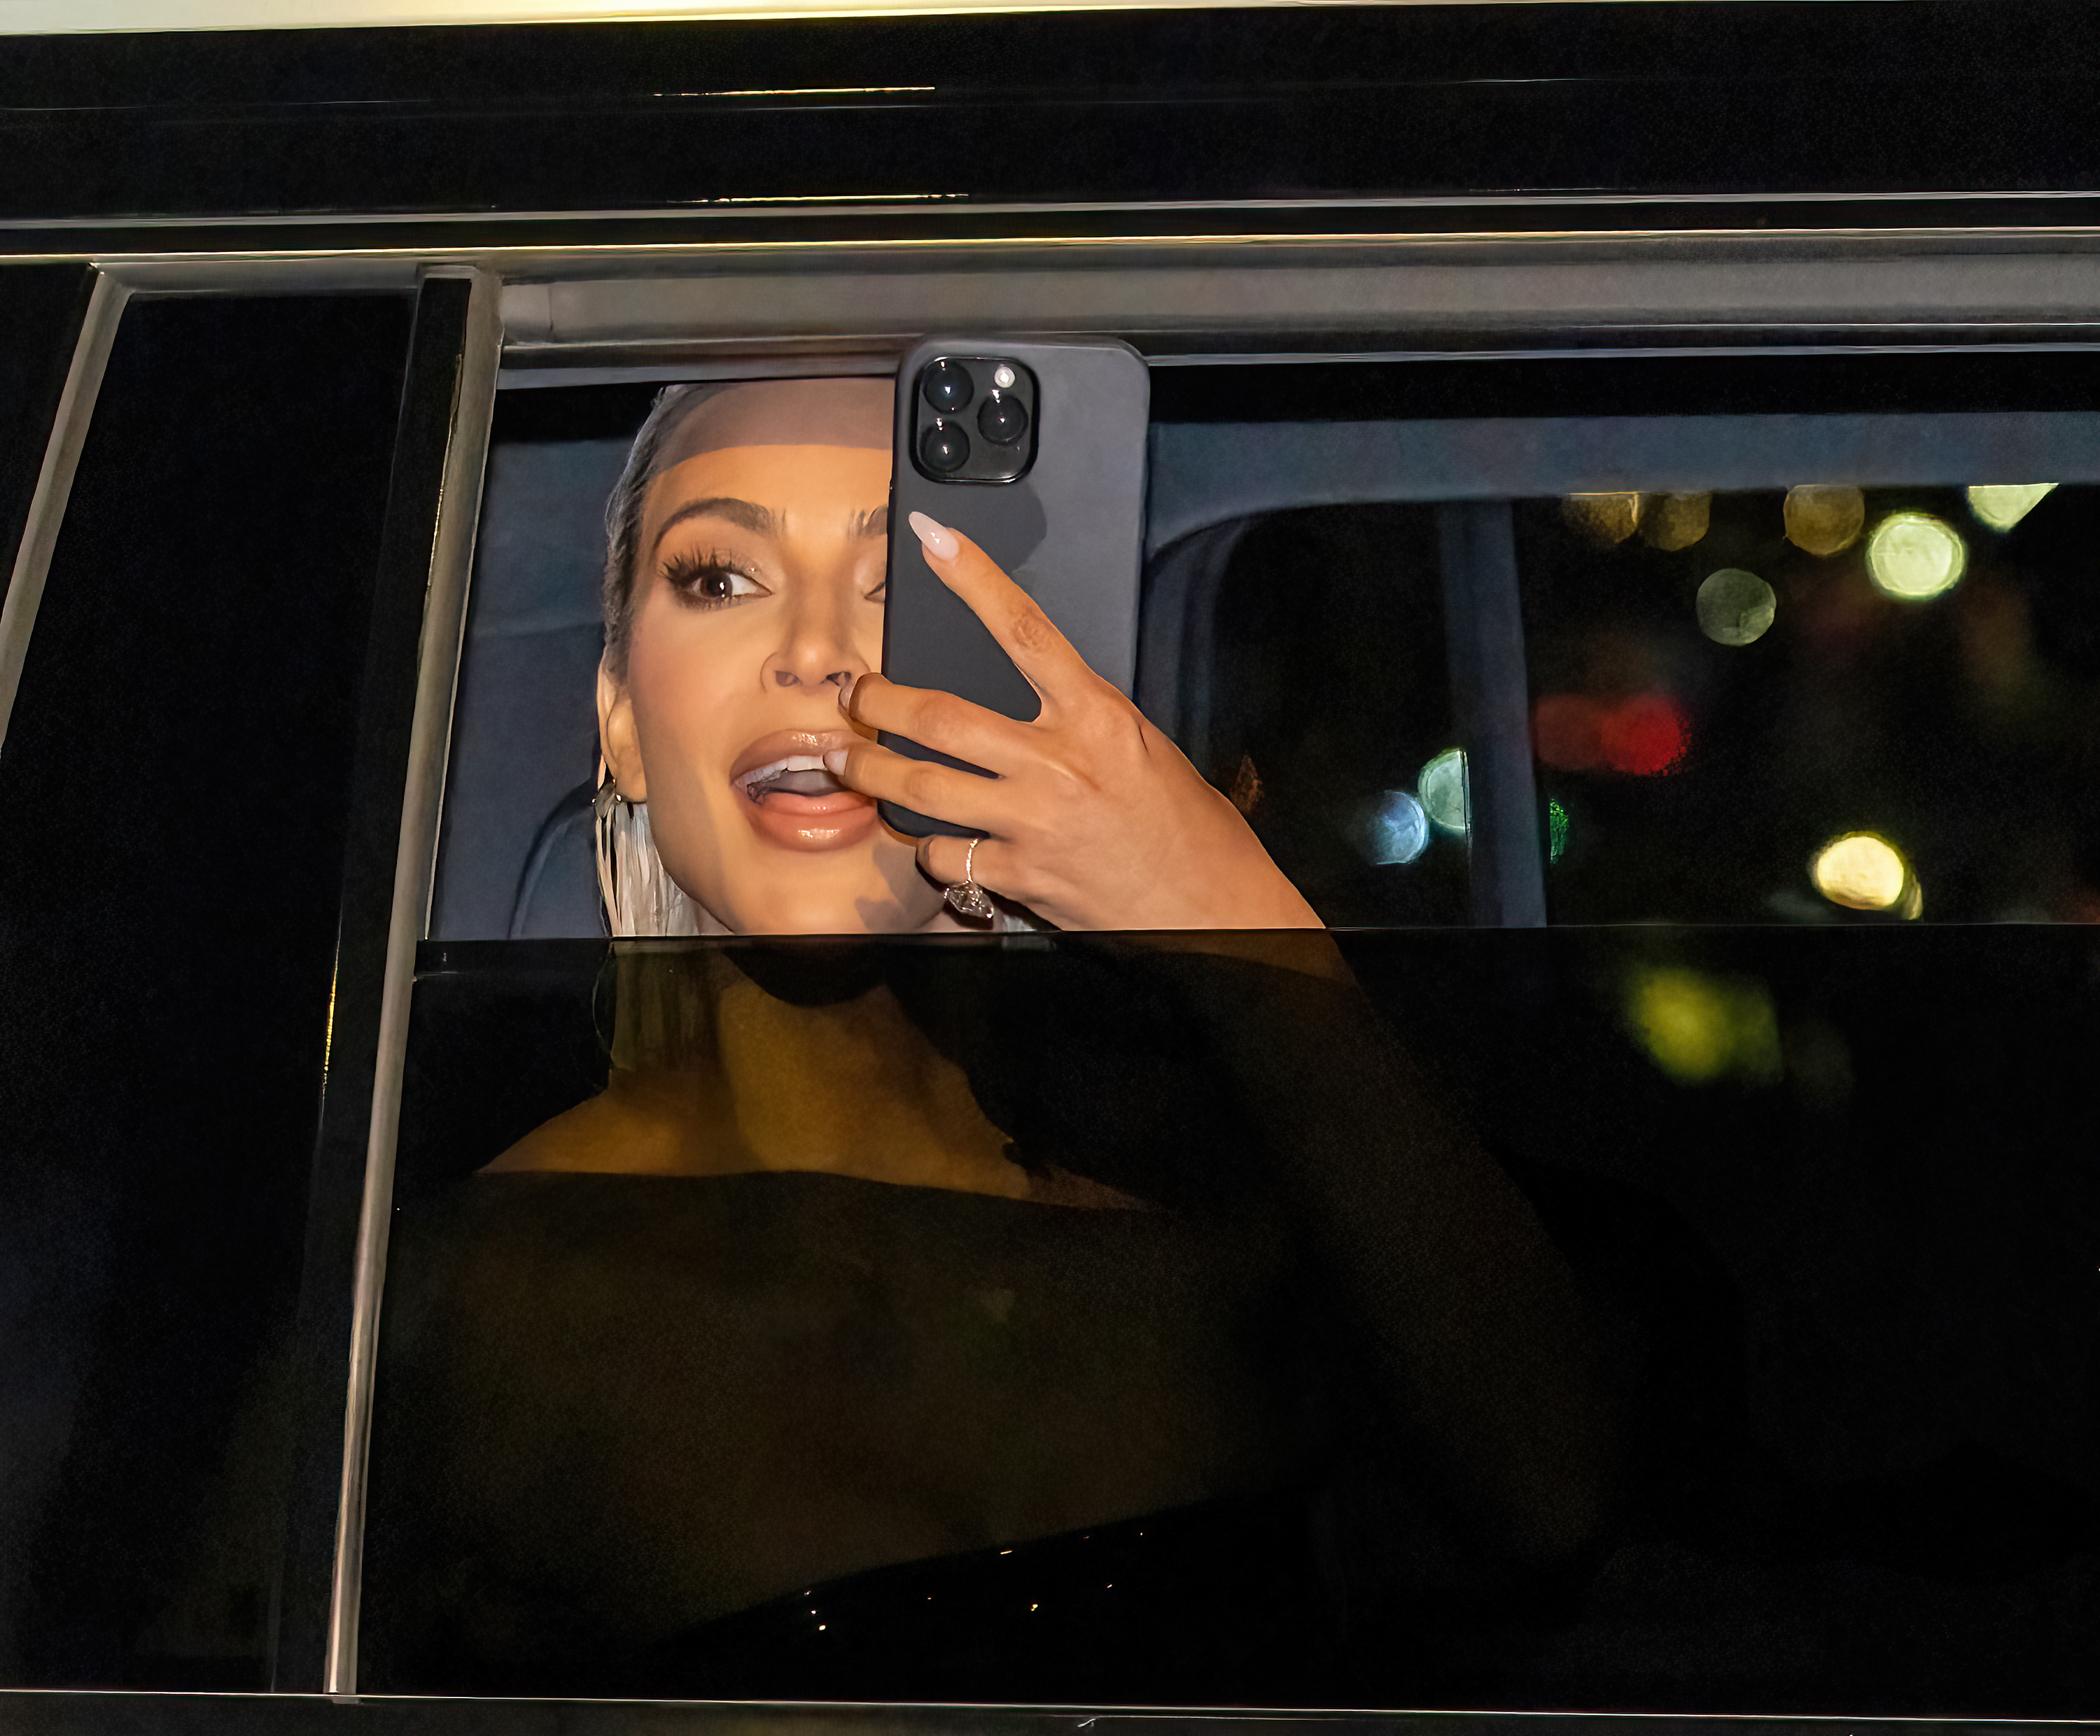 Kim Kardashian taking a selfie in a car, wearing an off-the-shoulder outfit